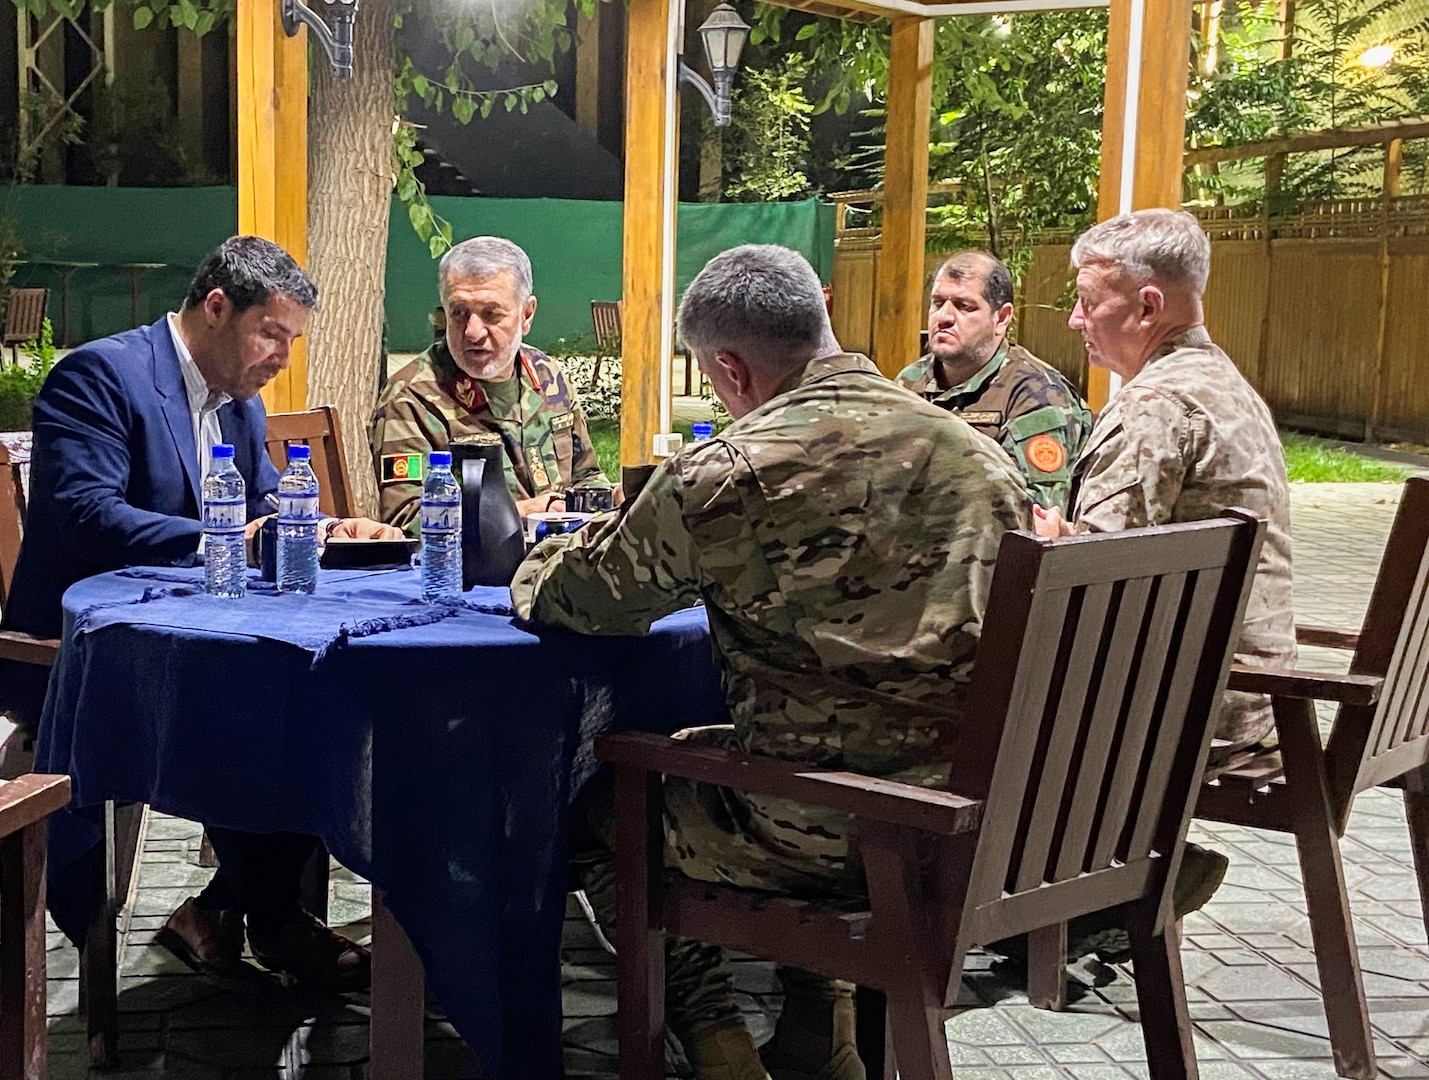 Gen. Frank McKenzie, commander, U.S. Central Command, right, meets with Afghan Minister of Defense, General Bismillah Khan Mohammadi, second from left, in Kabul to discuss the security situation in Afghanistan, July 25, 2021. McKenzie reiterated U.S support to the government’s plan for the defense of Afghanistan through air strikes, contract logistics support, intelligence sharing, and funding for the Afghan National Defense and Security Forces (ANDSF). “We had a very good dialogue on the government's defense plan as they work to stabilize the security situation and to blunt the Taliban offensive,” said McKenzie. (U.S. Central Command Public Affairs courtesy photo)